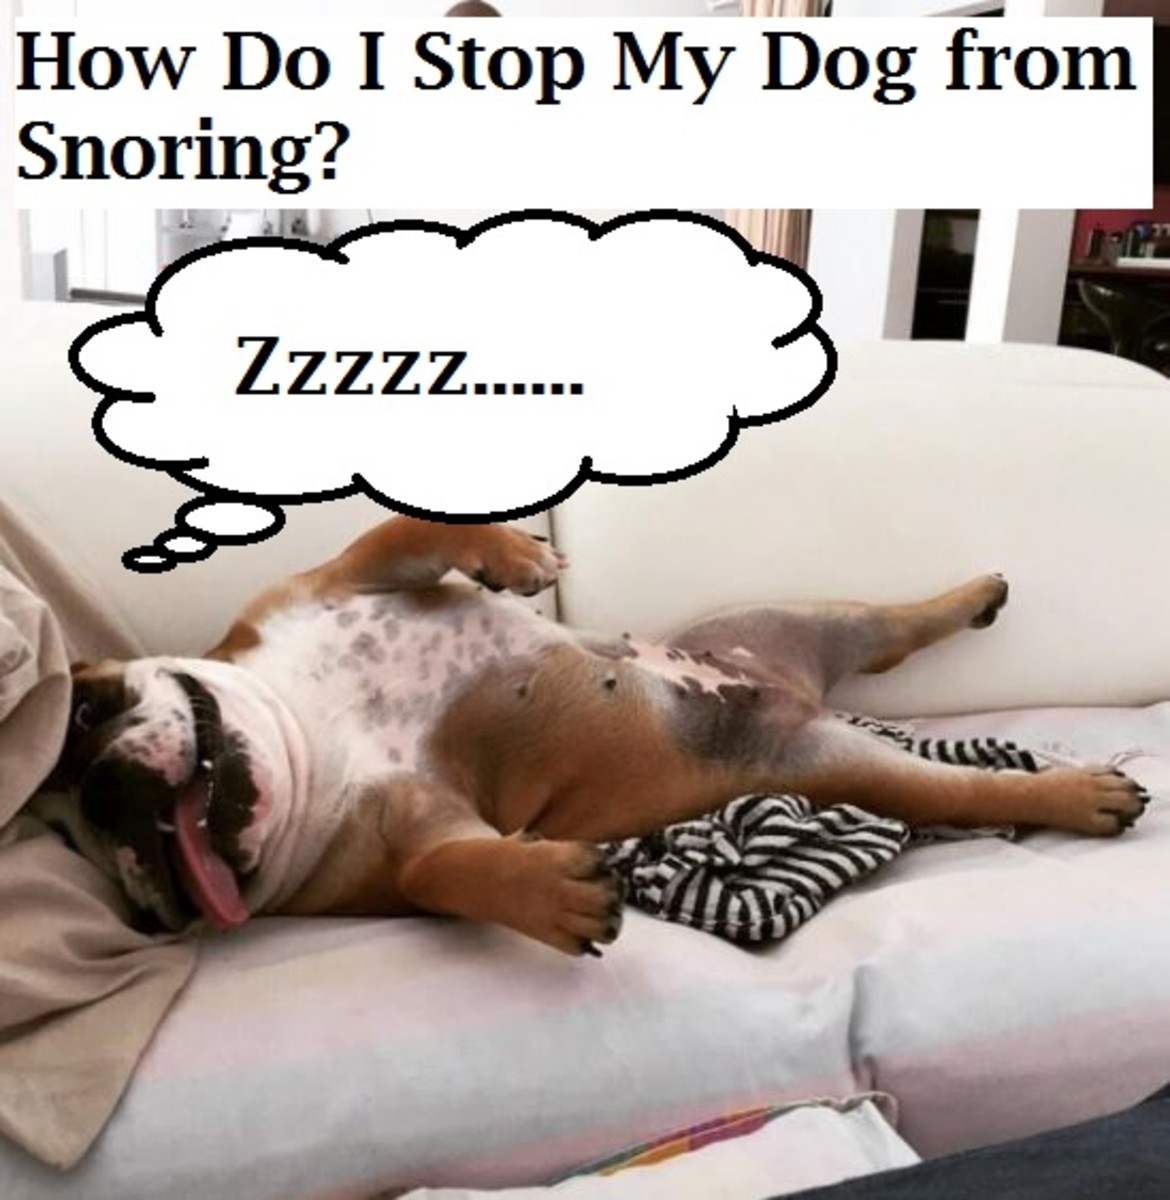 Why Is My Dog Snoring? (And How to Address the Problem) - PetHelpful